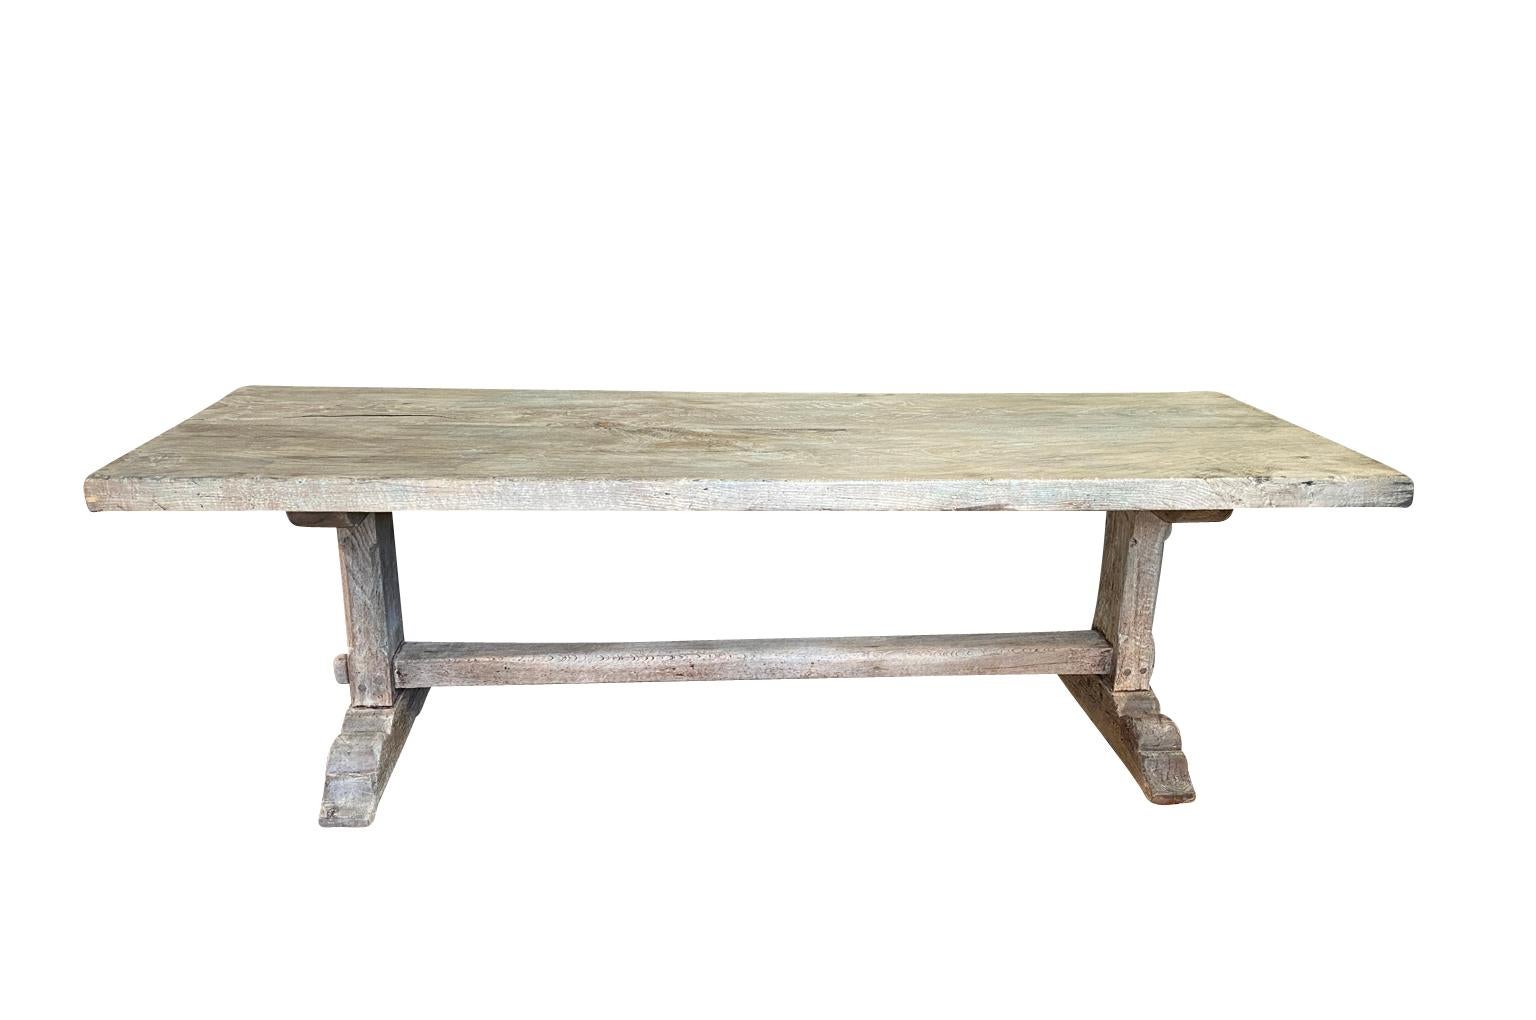 A very charming late 19th century trestle table - farm table from the Provence region of France. Wonderfully constructed from oak with a thick top. Terrific patina.